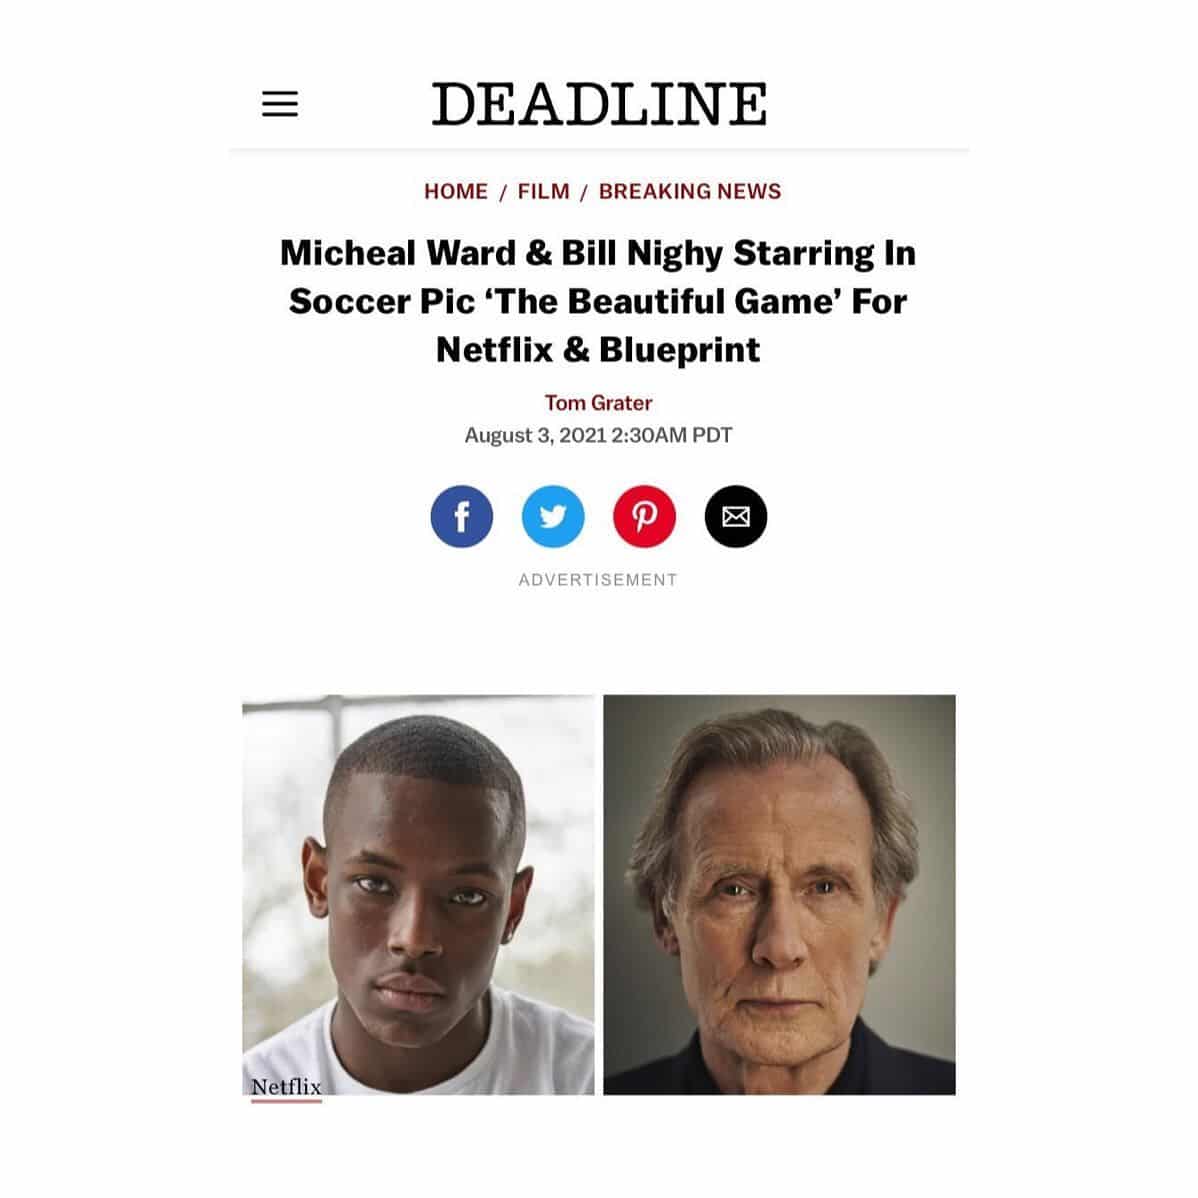 #BillNighy, @michealward and @kittheyounger to star in THE BEAUTIFUL GAME for @netflixfilm 
.
.
.
.
.
.
.